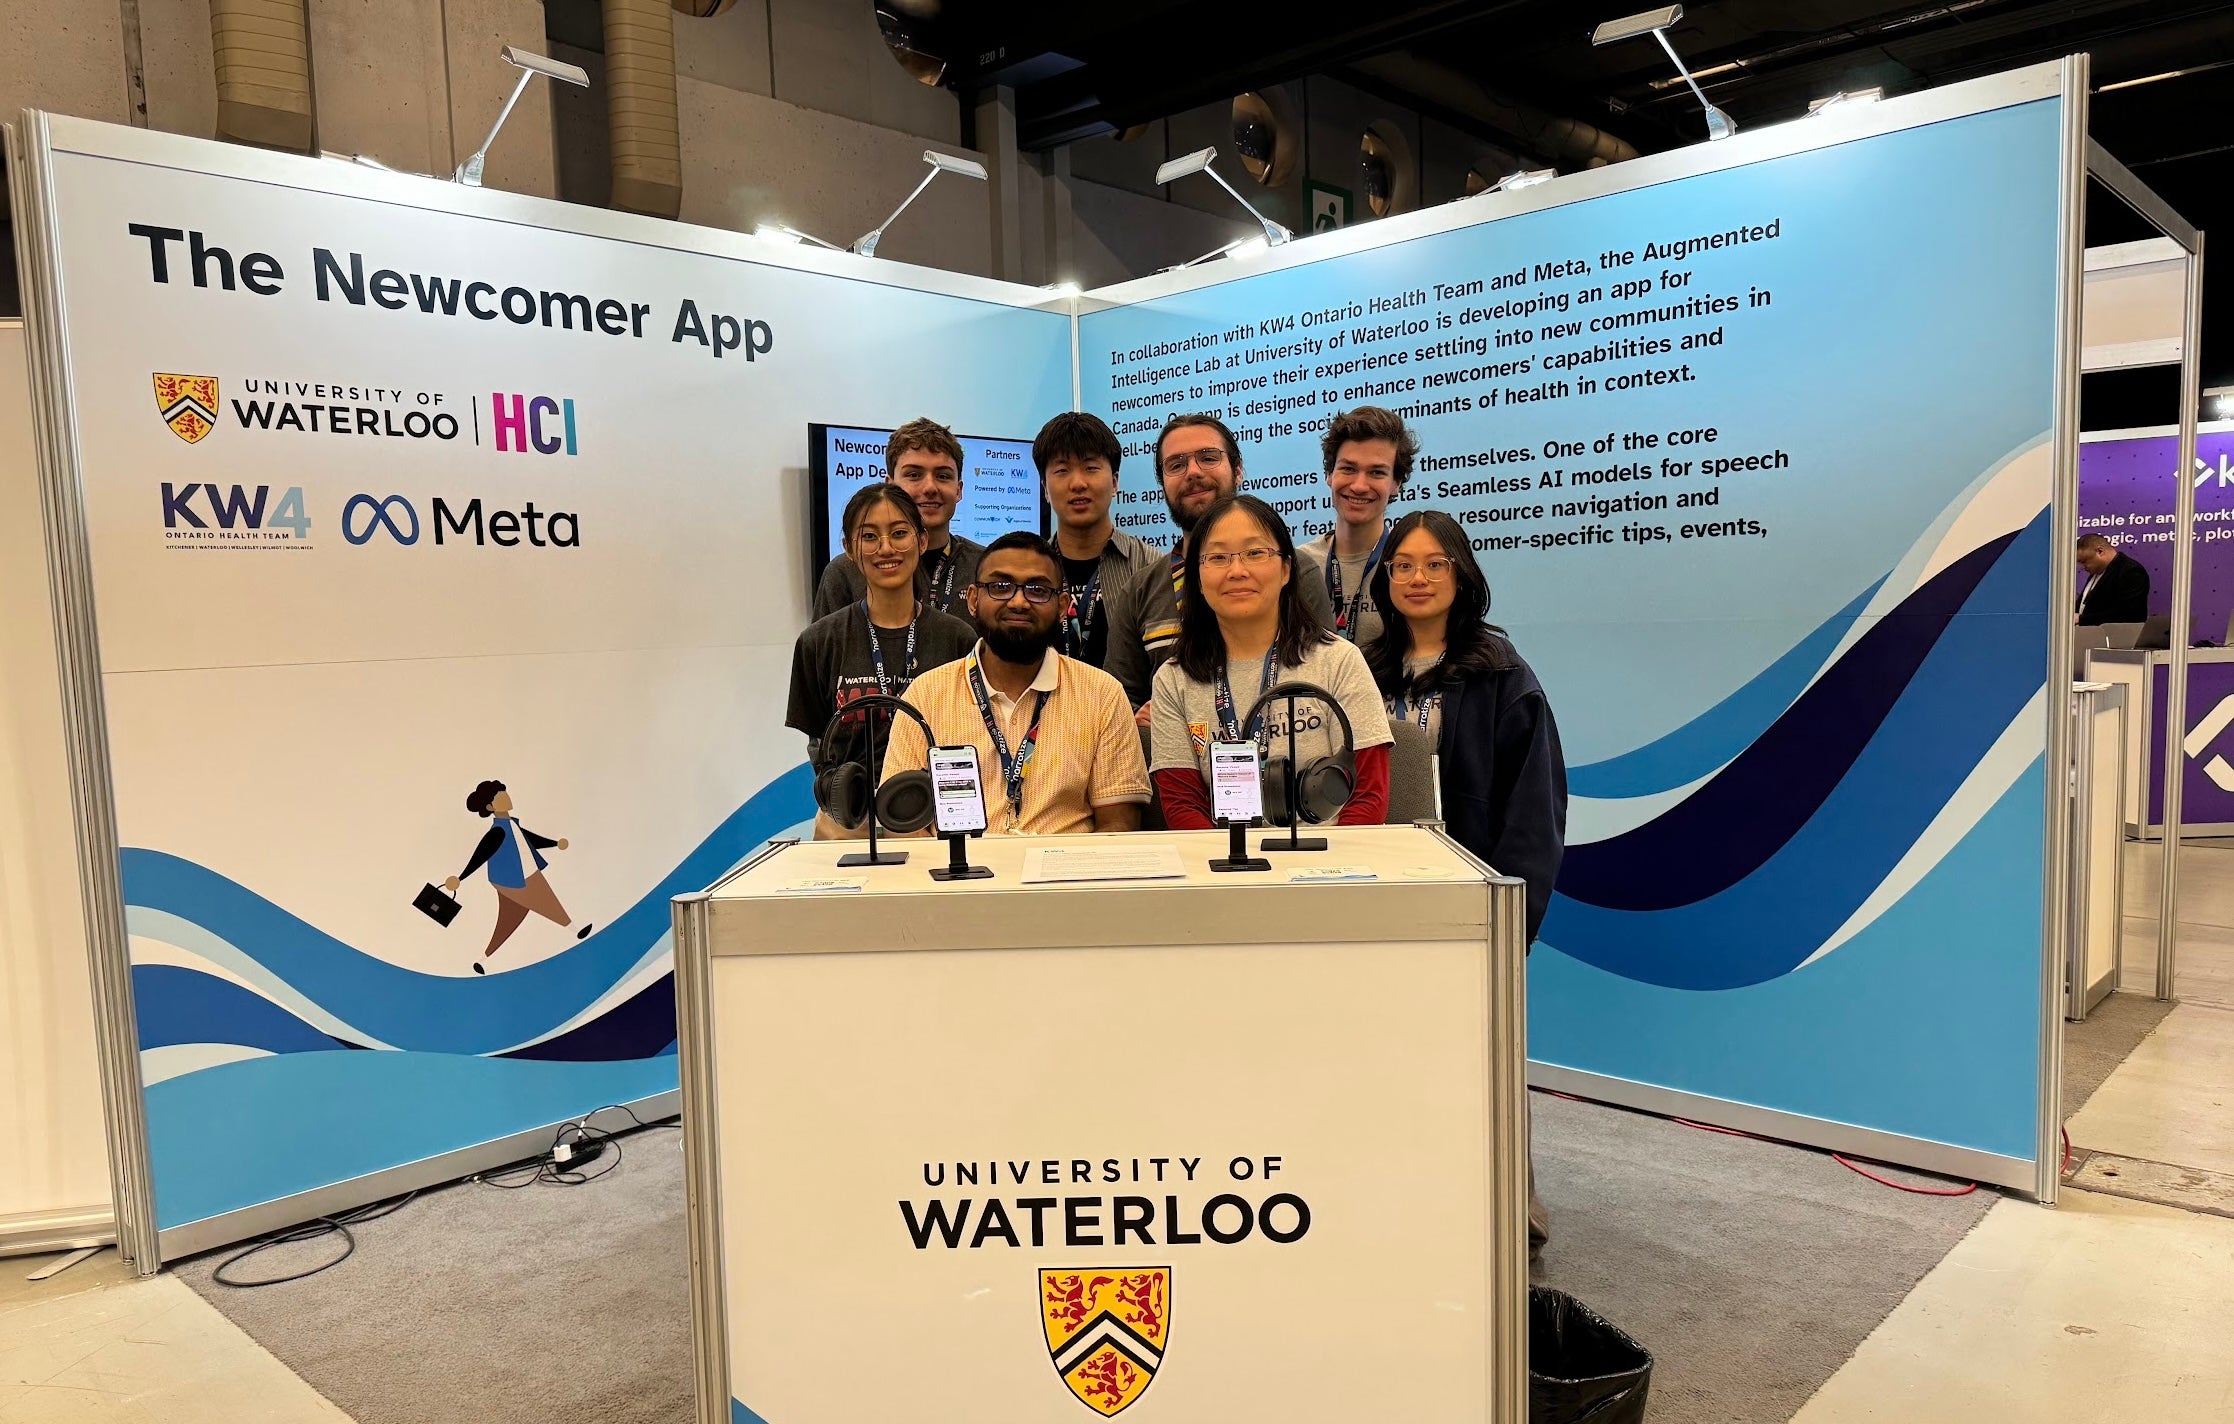 photo of the research team in front of their "The Newcomer App" booth at a conference. The table has 2 phones with 2 headphones